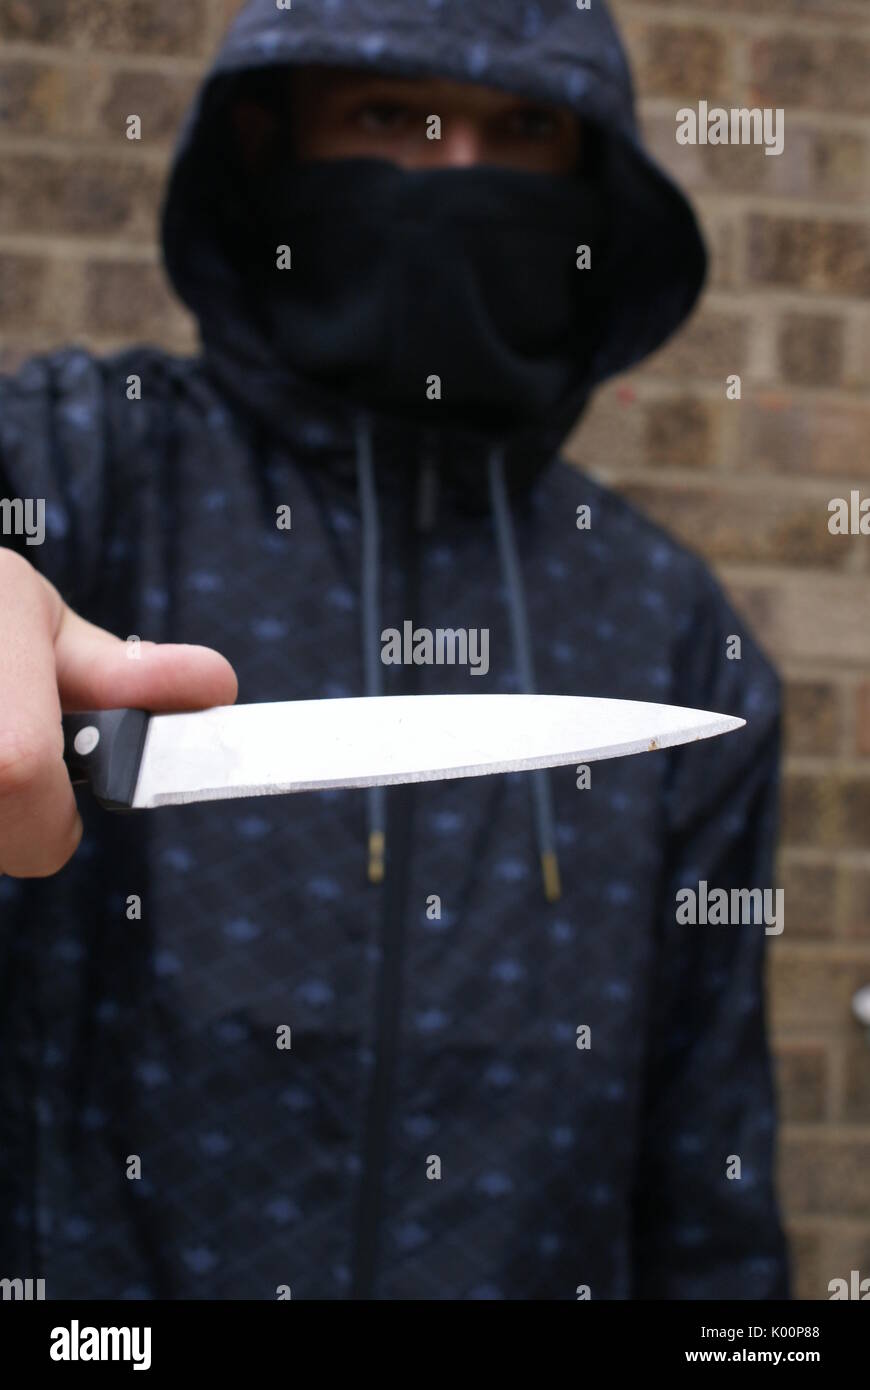 knife crime, risk to life Stock Photo